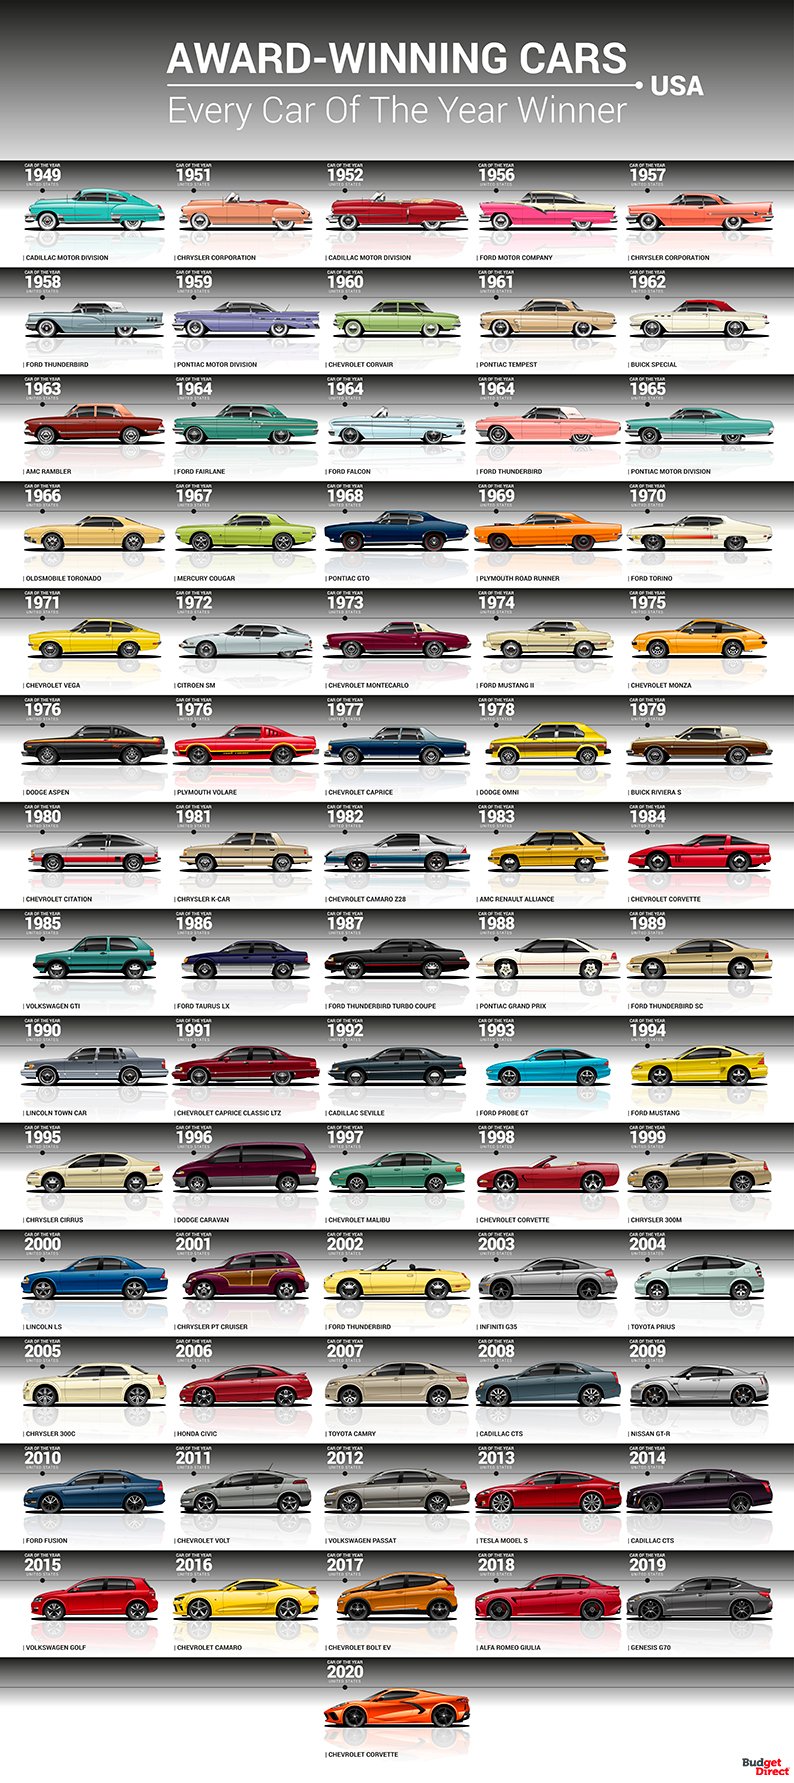 Every Motor Trend Car Of The Year Winner From 1949 To 2020, Visualized |  Digg